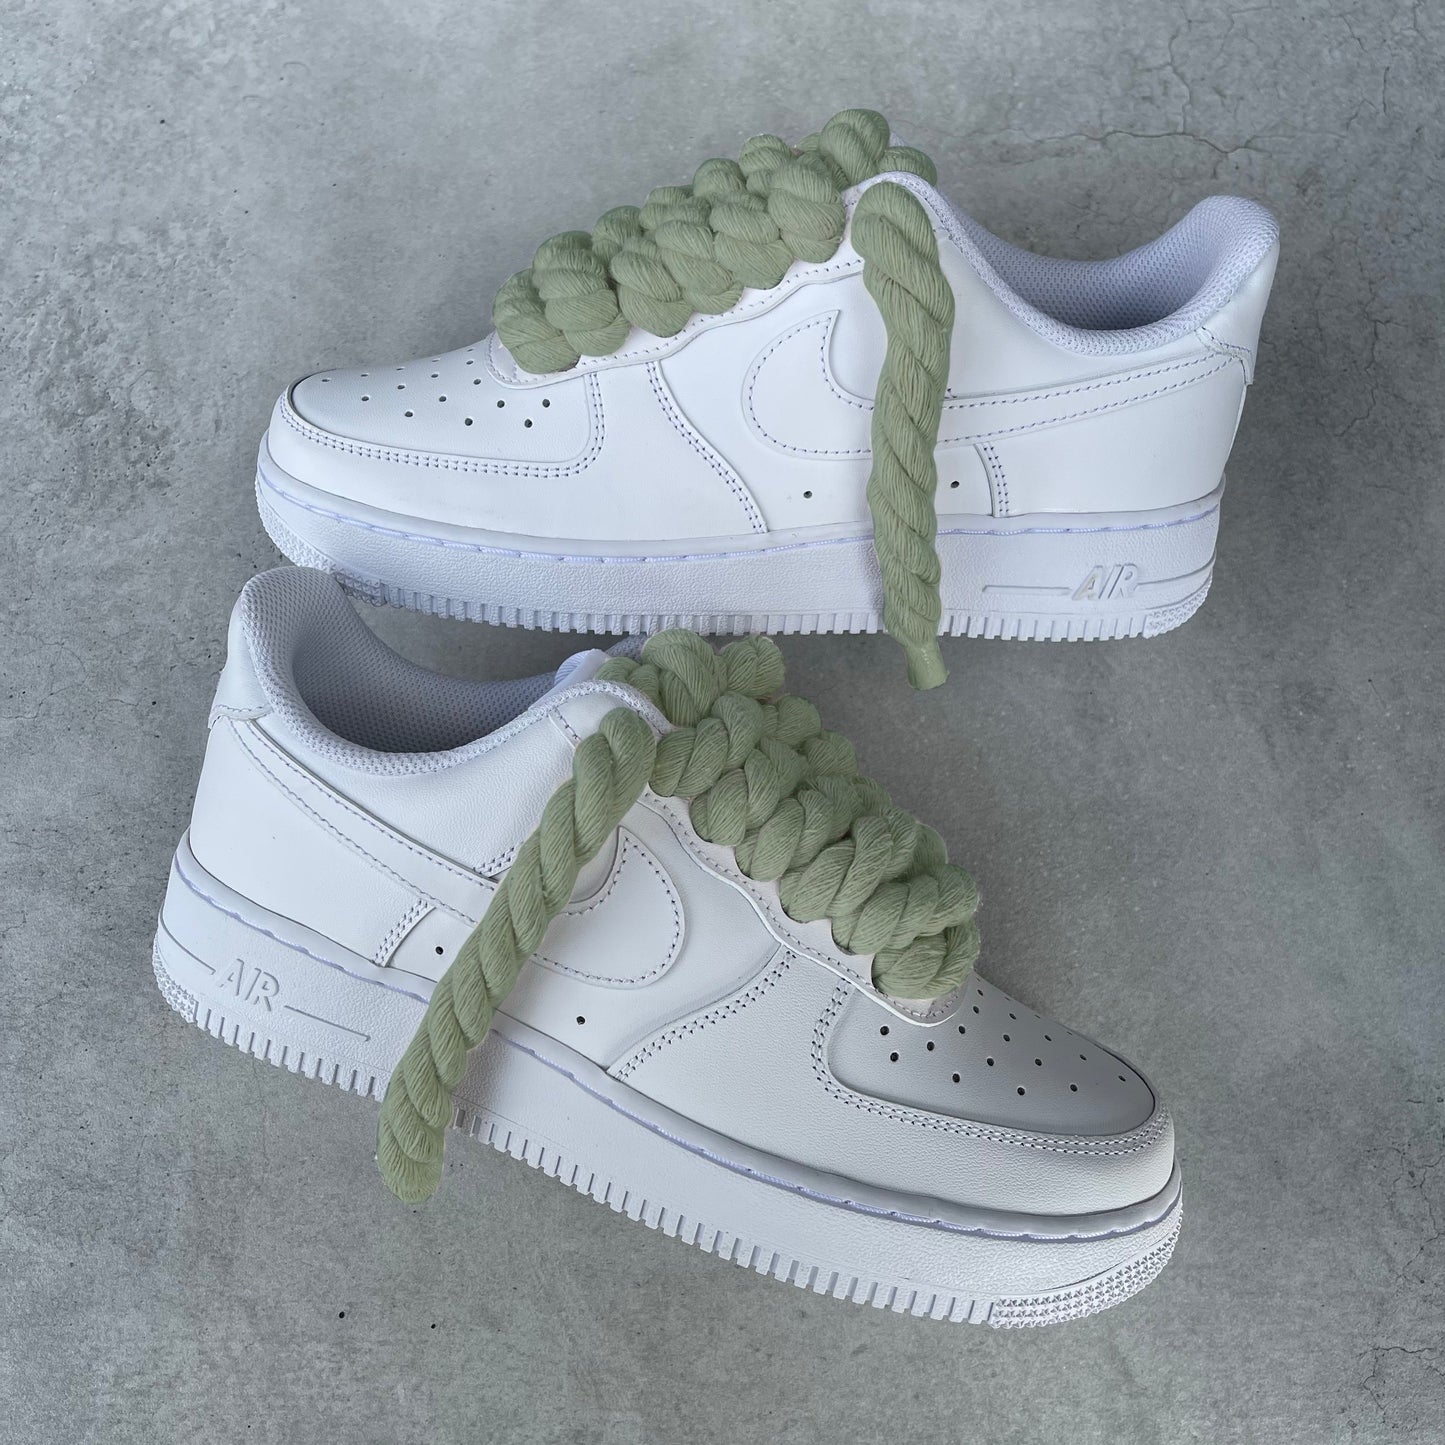 Custom AIR FORCE 1 - Rope laces (olive)